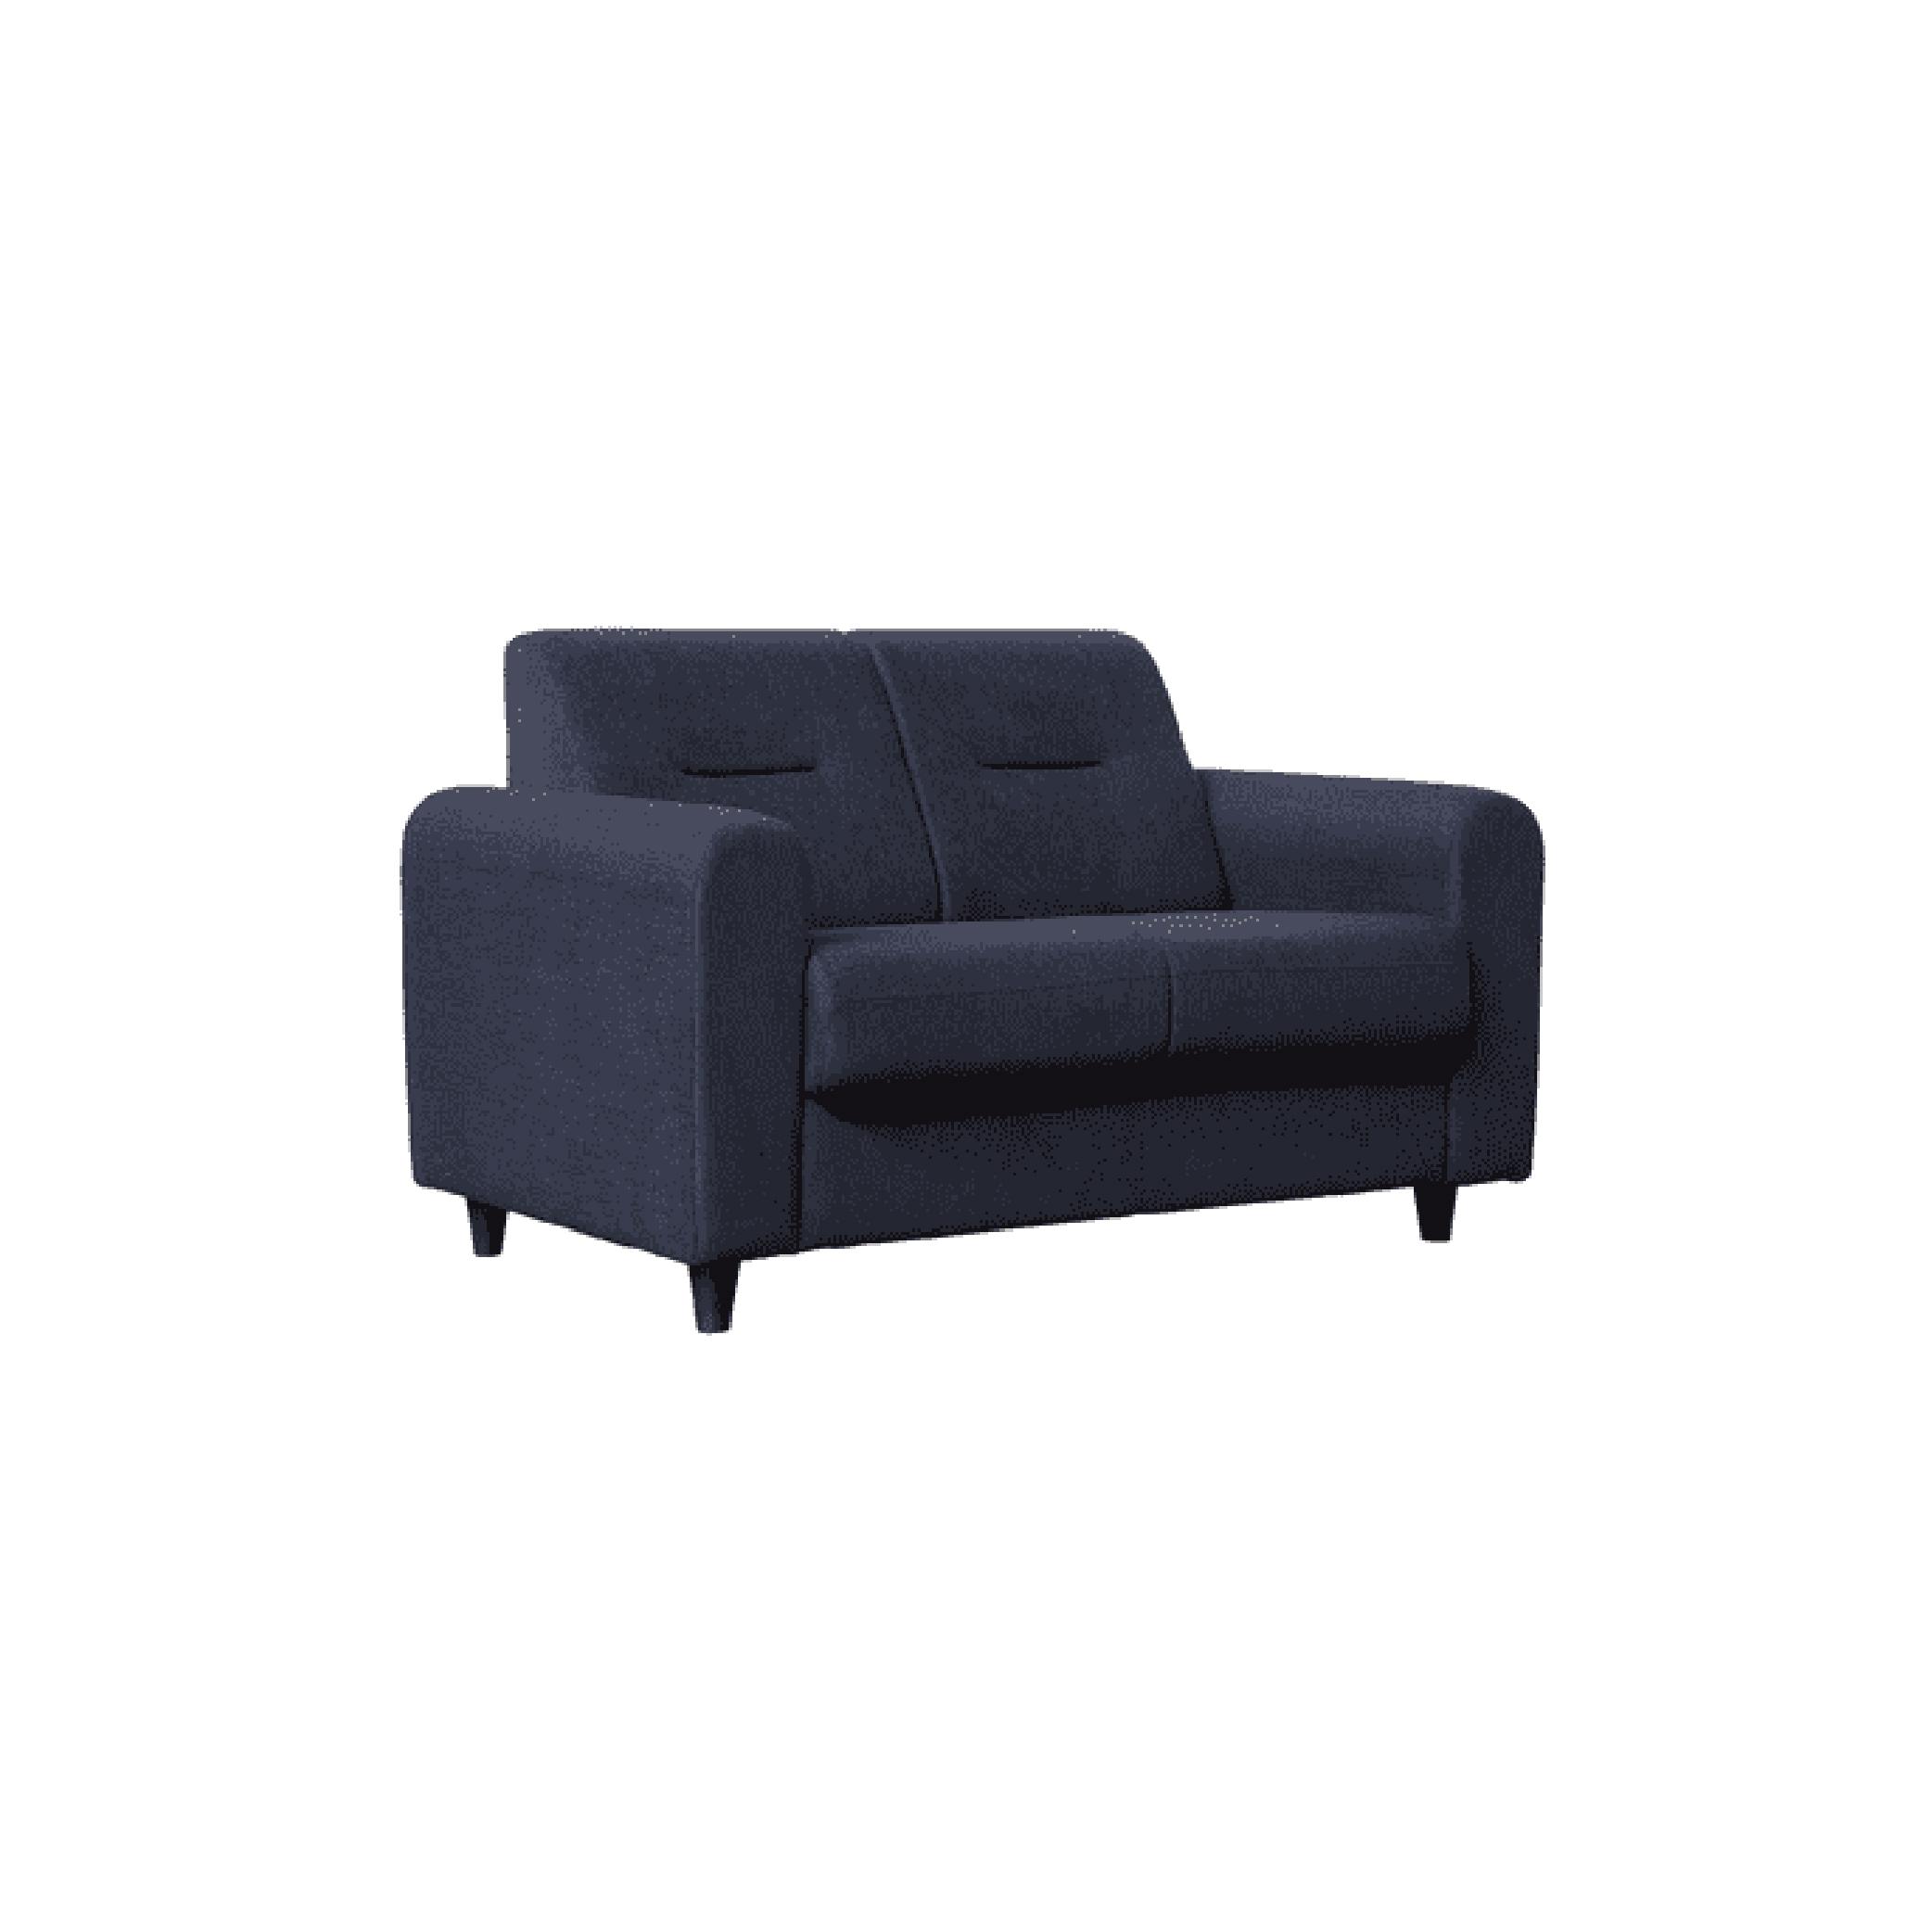 Nola Two Seater Sofa in Navy Blue Colour